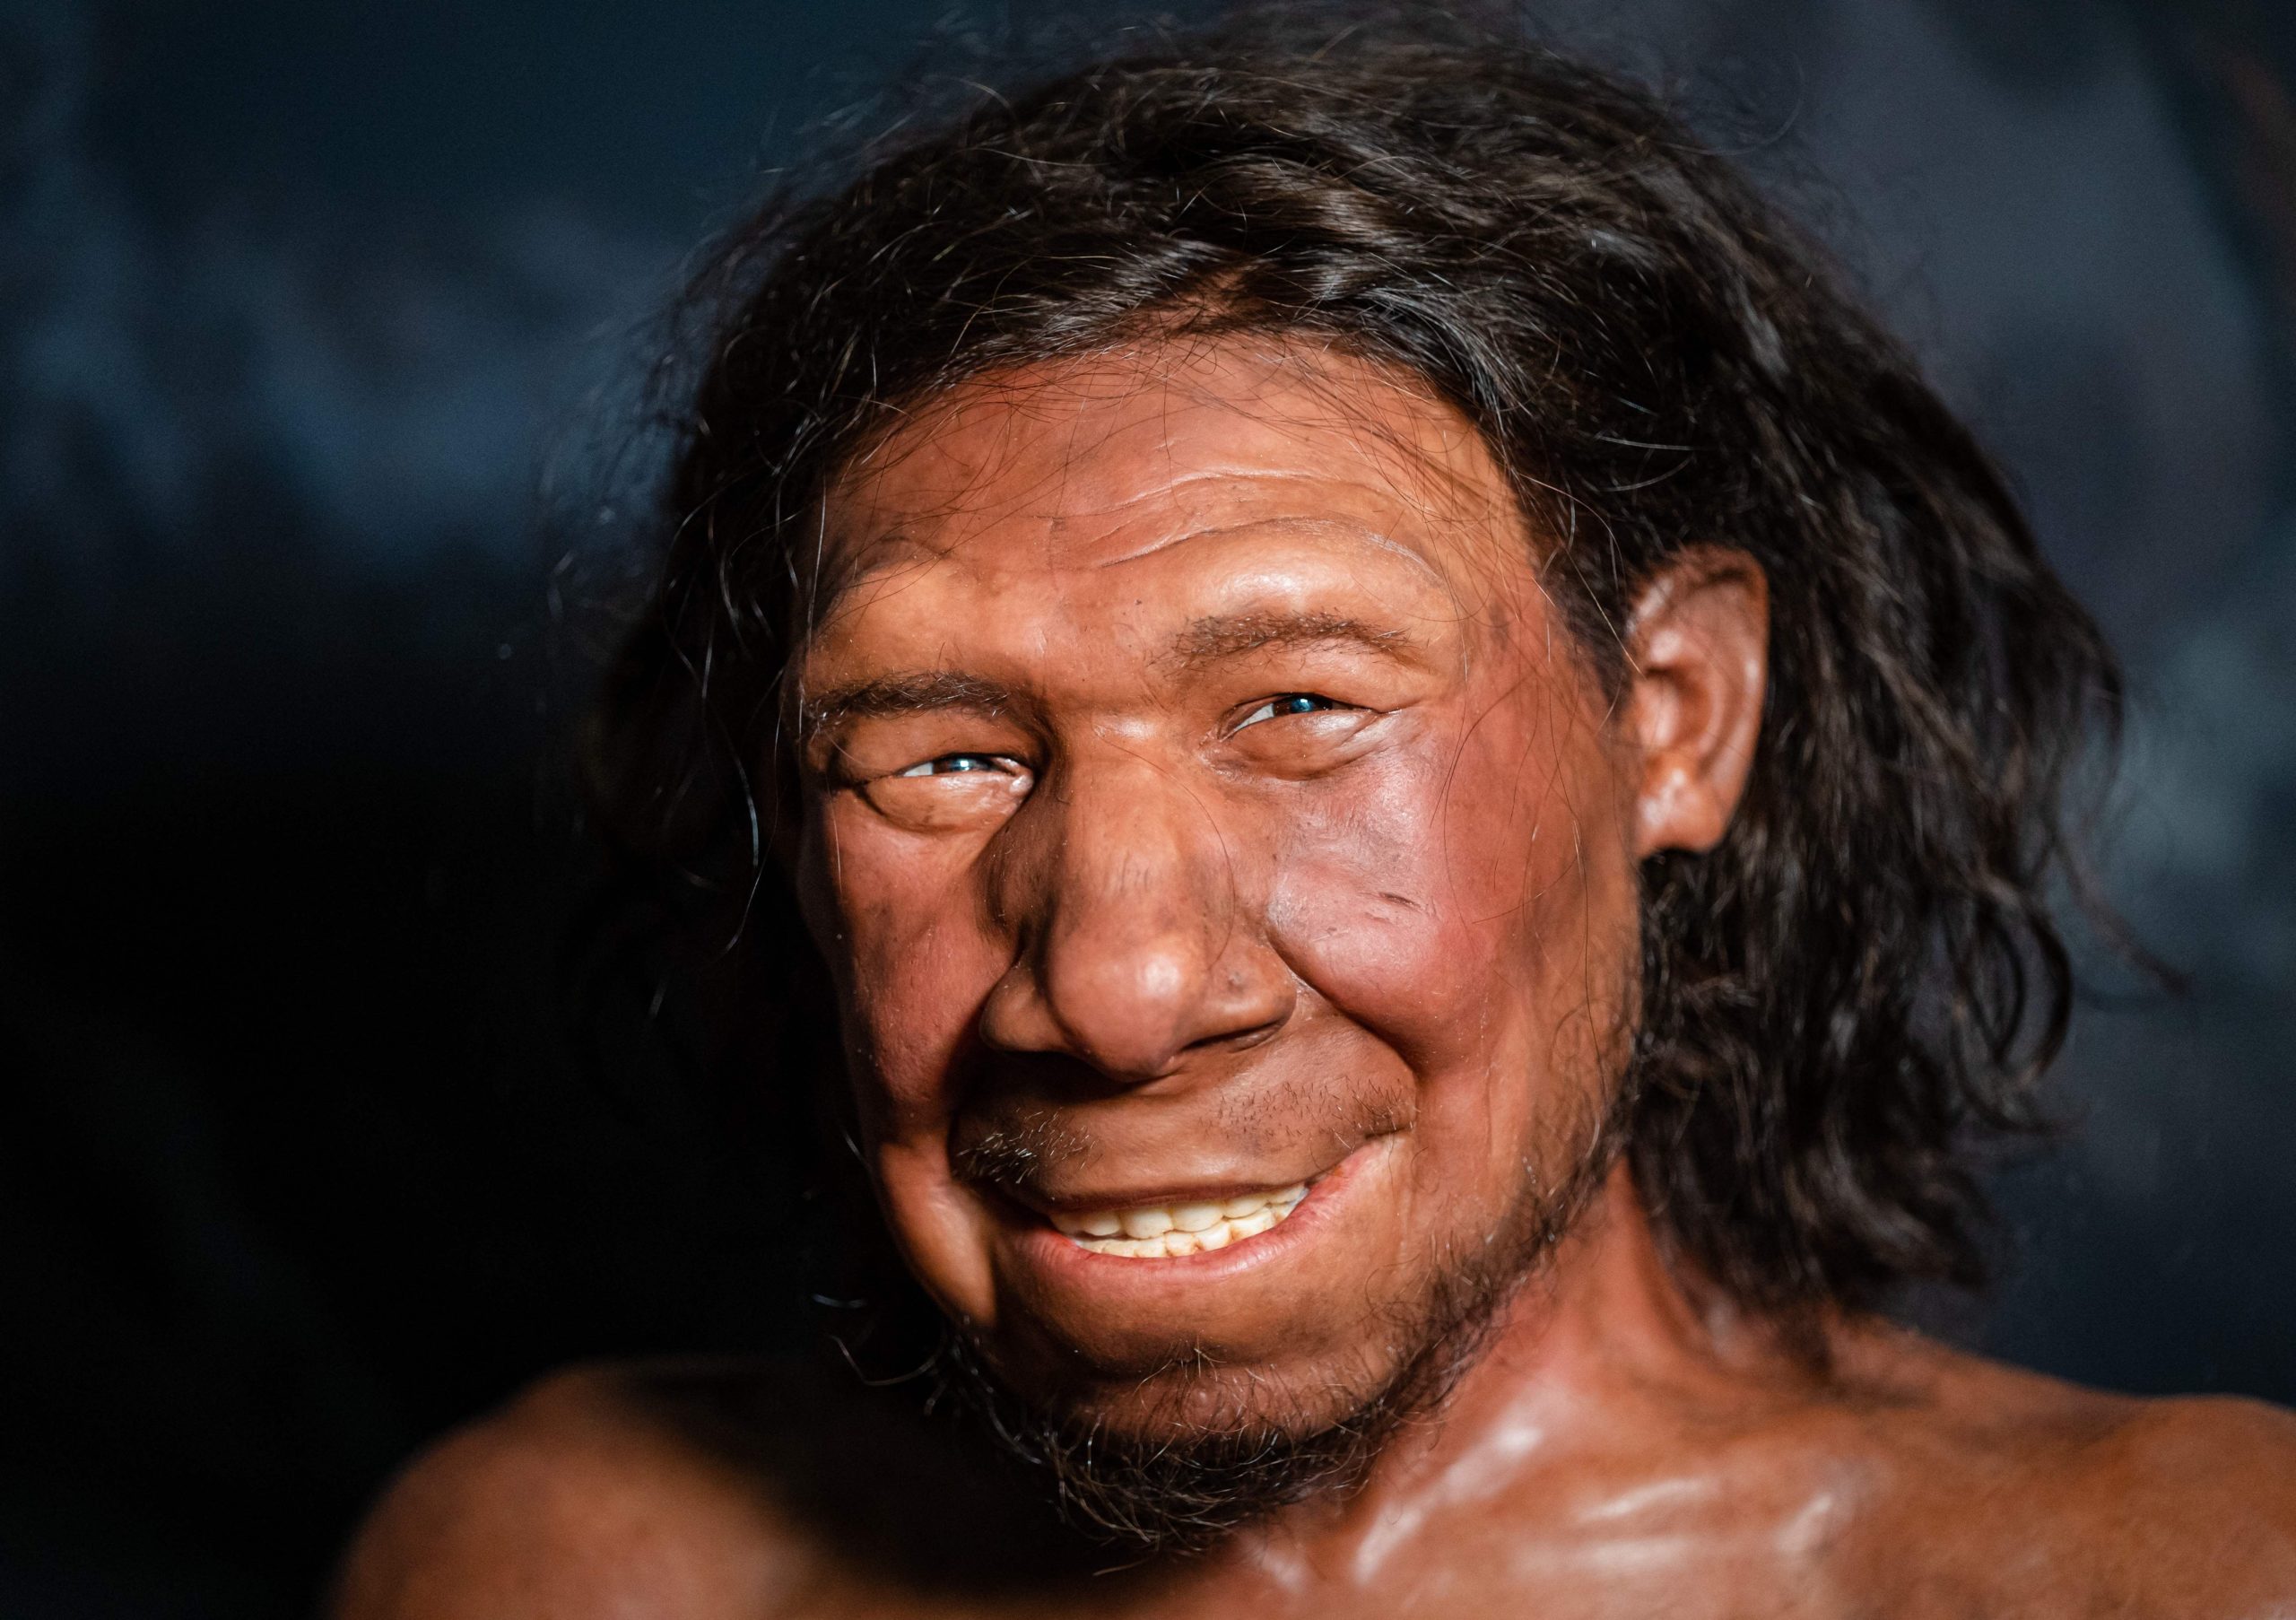 A reconstruction of the face of a Neanderthal at the National Museum of Antiquities in Leiden, Netherlands. (Photo: Bart Maat / ANP / AFP, Getty Images)